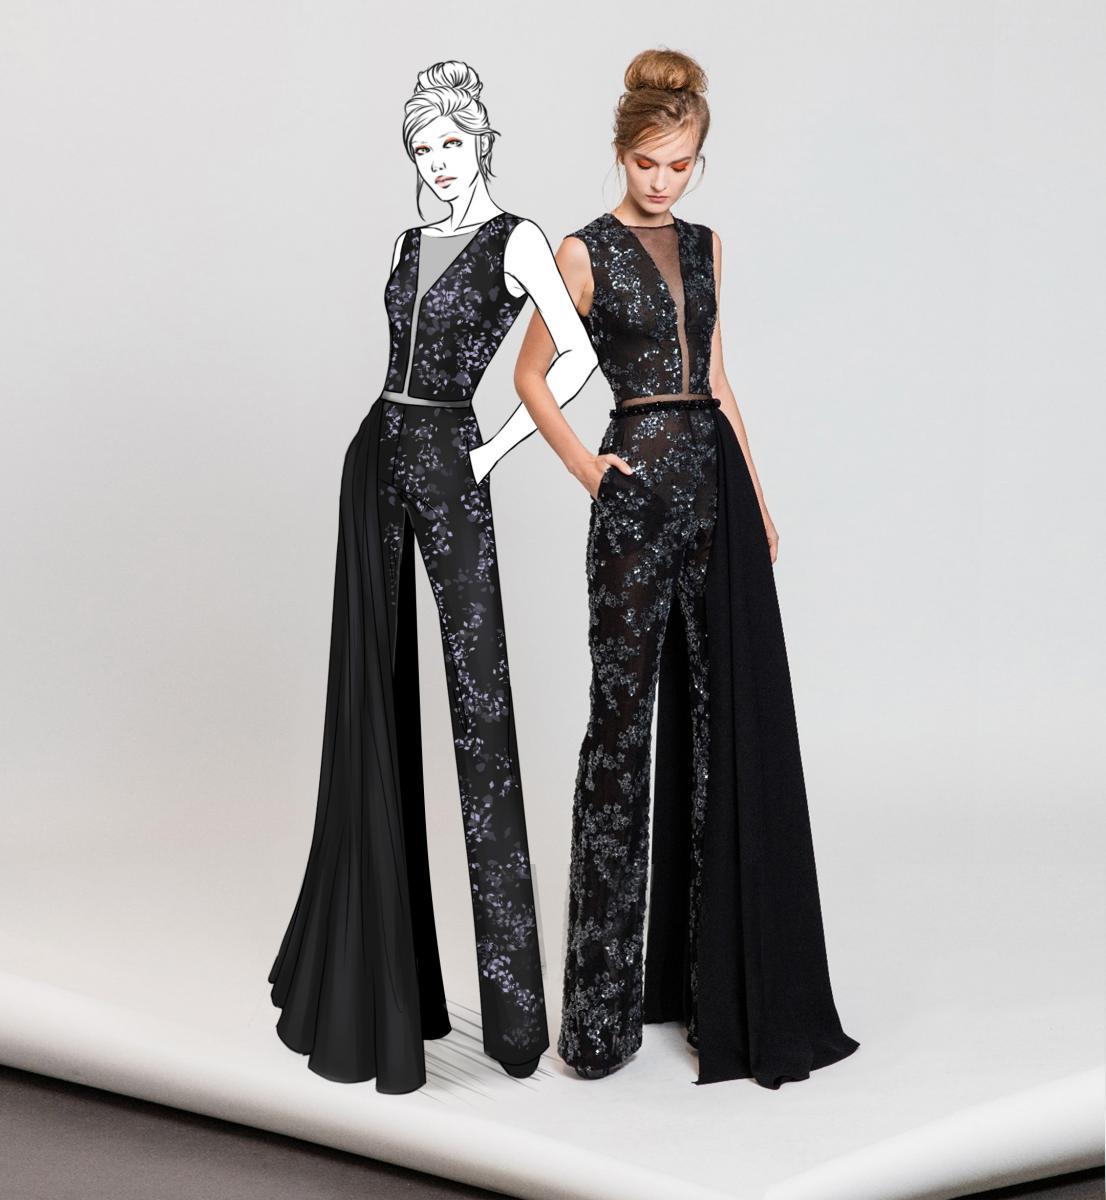 Marvelous long Jumpsuit by Revive by Tony Ward

Look absolutely dazzling in Revive by Tony Ward Nala Jumpsuit. This lovely piece features a column silhouette and glittering accents. The sleeveless bodice has a high neckline neckline and a natural